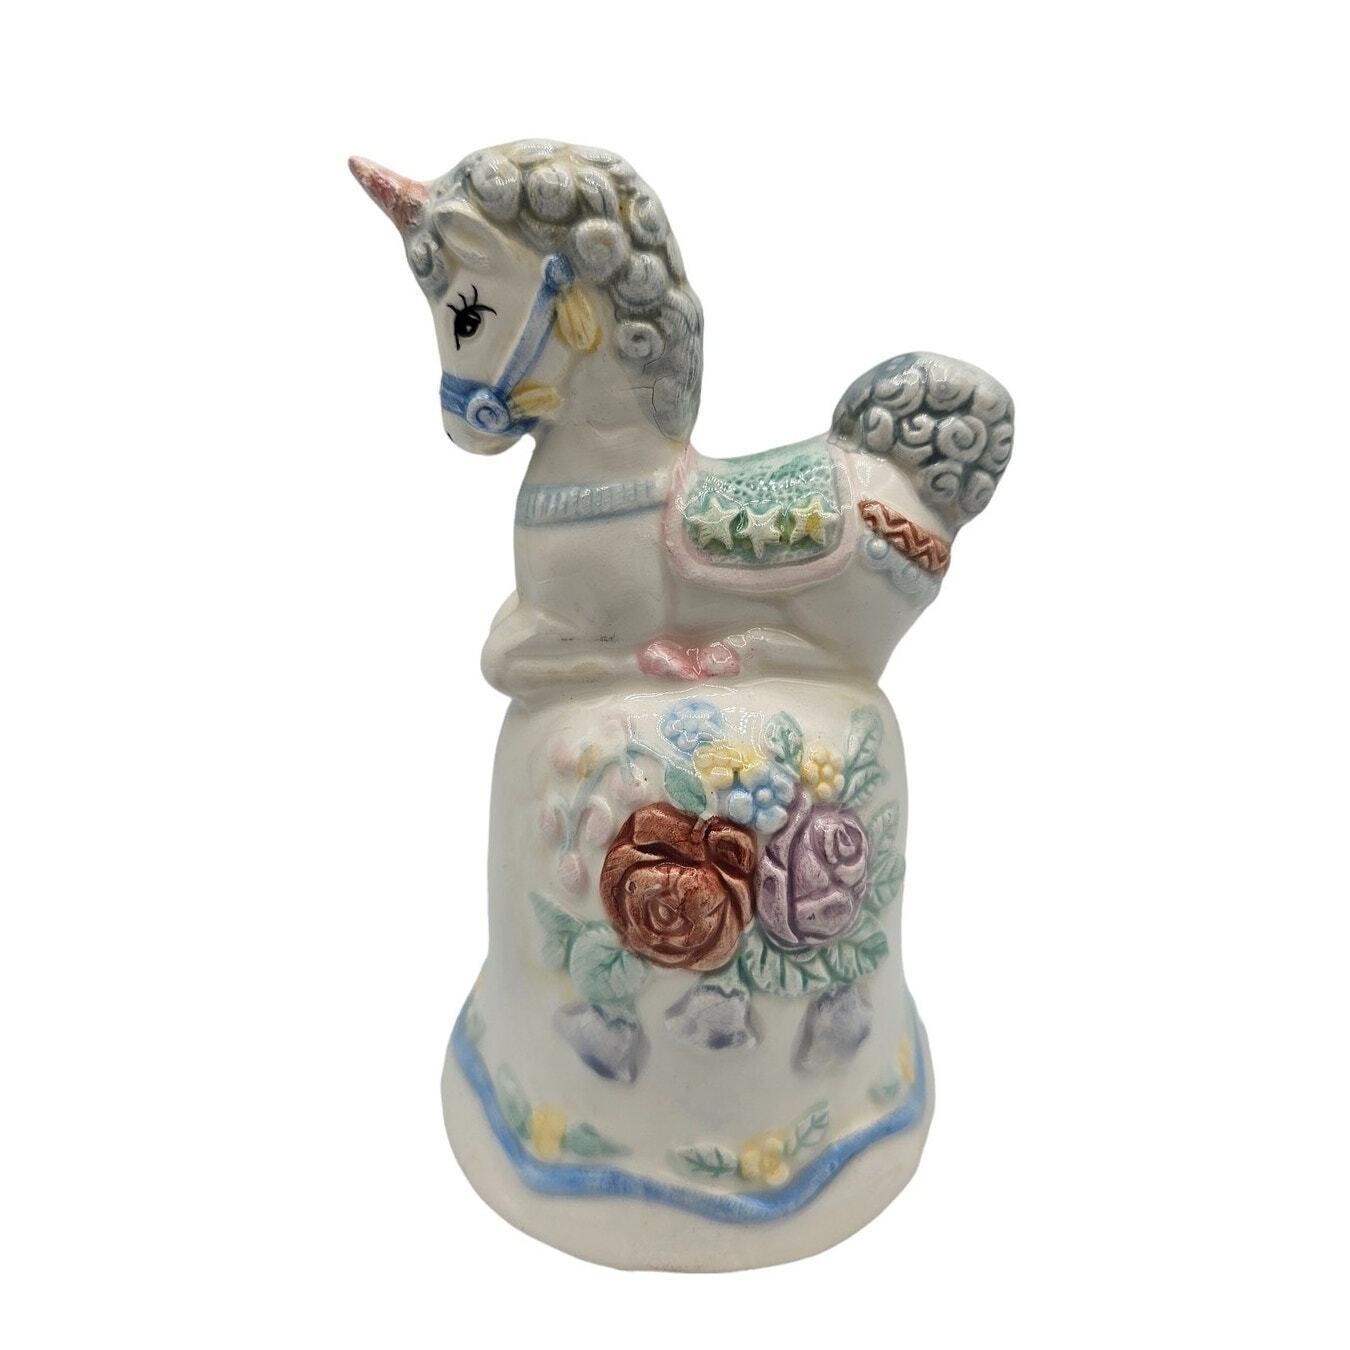 Vintage 1990s Hand Painted Ceramic Unicorn Bell Light Colors Floral